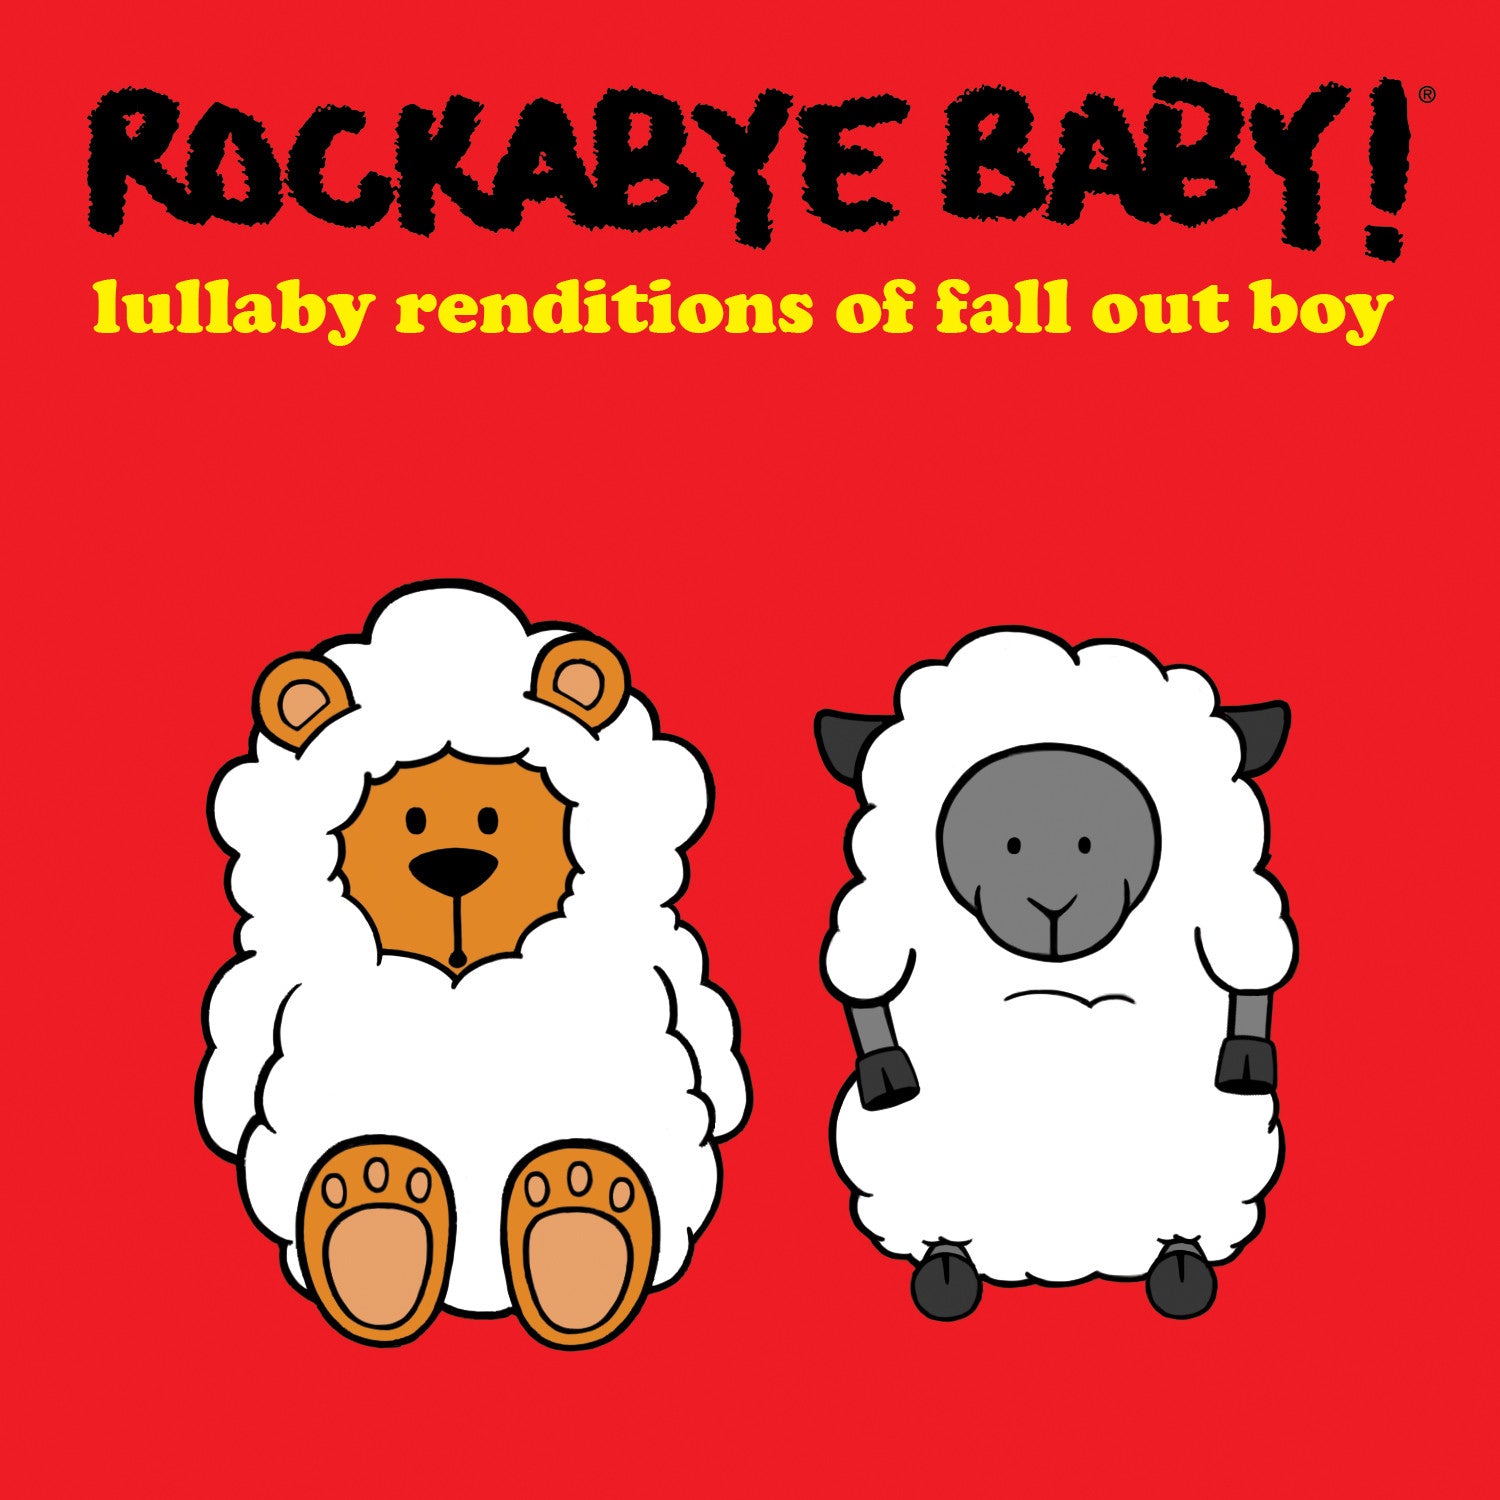 rockabye baby lullaby renditions fall out boy